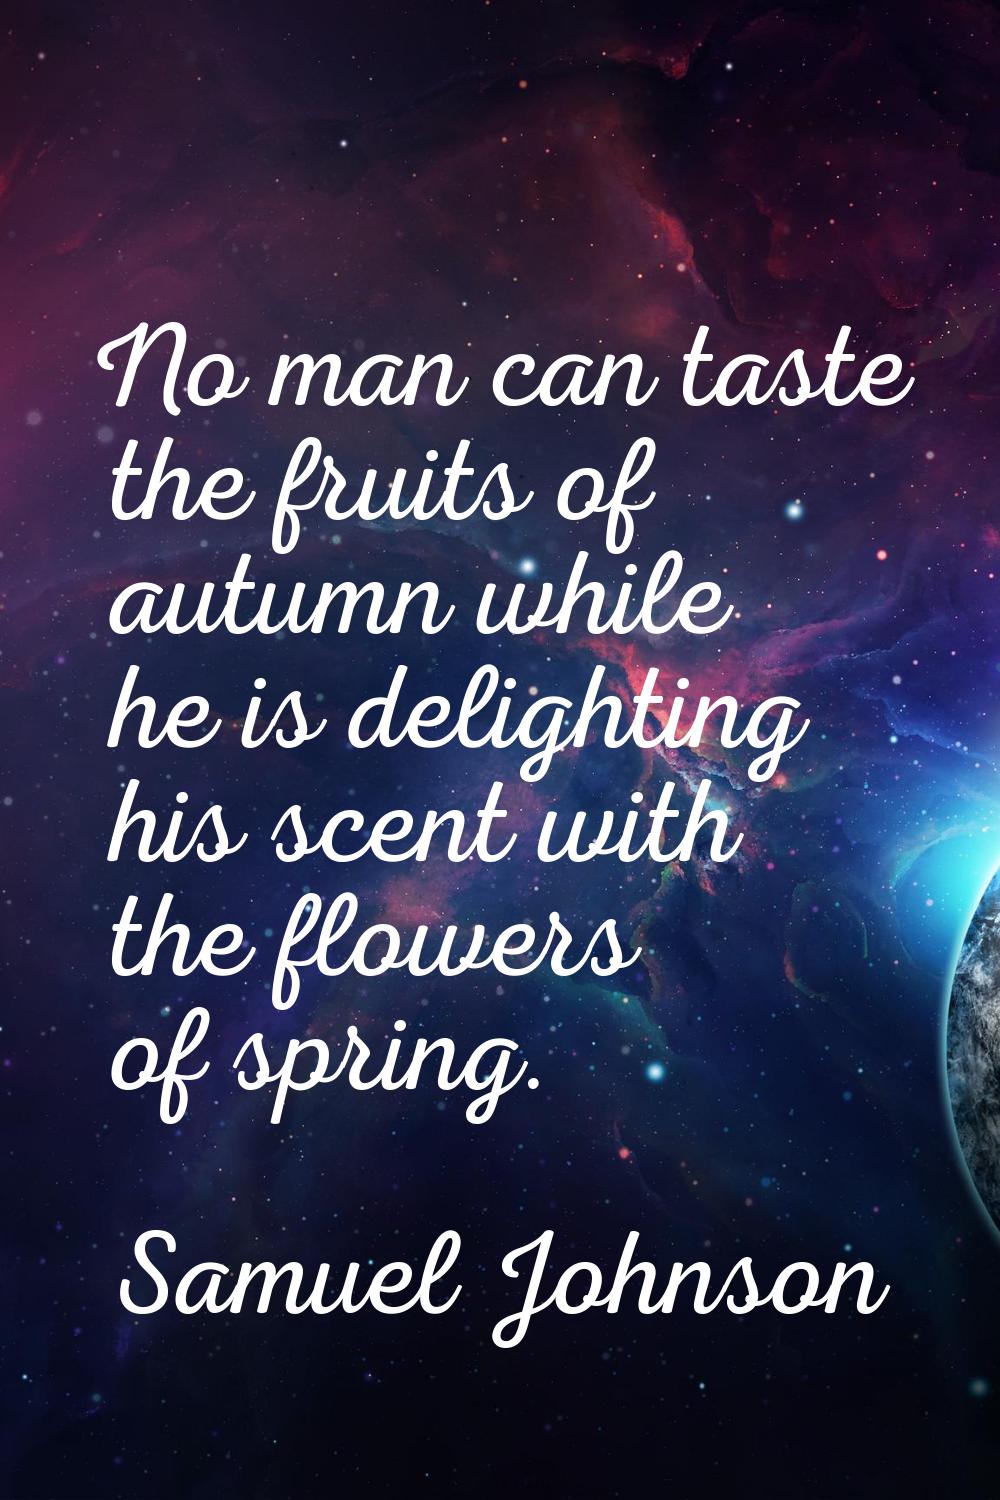 No man can taste the fruits of autumn while he is delighting his scent with the flowers of spring.